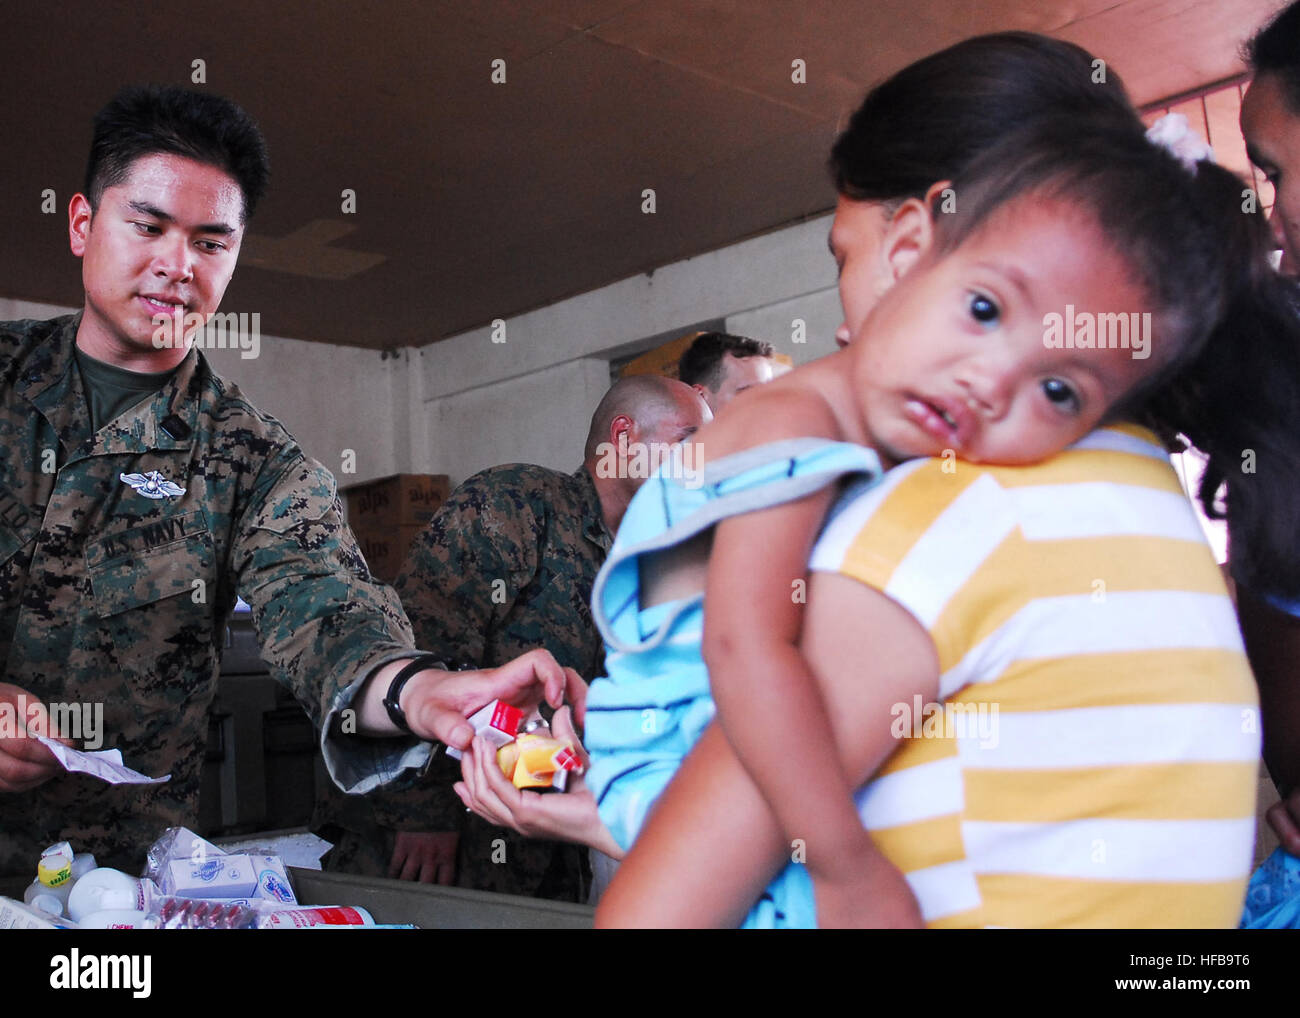 Petty Officer 2nd Class Joseph Castillo, hospital corpsman, from Combat Logistics Battalion Health Service Support Team, 31st Marine Expeditionary Unit, hands out medication during a medical civil action project at San Juan Elementary School. The 31st MEU is operating with the forward-deployed Essex Amphibious Ready Group as part of Balikatan 2010, an annual, bilateral exercise designed to improve interoperability between the U.S. and Republic of the Philippines. Essex ARG Dental Civil Action Project with the Armed Forces of the Philippines 258418 Stock Photo